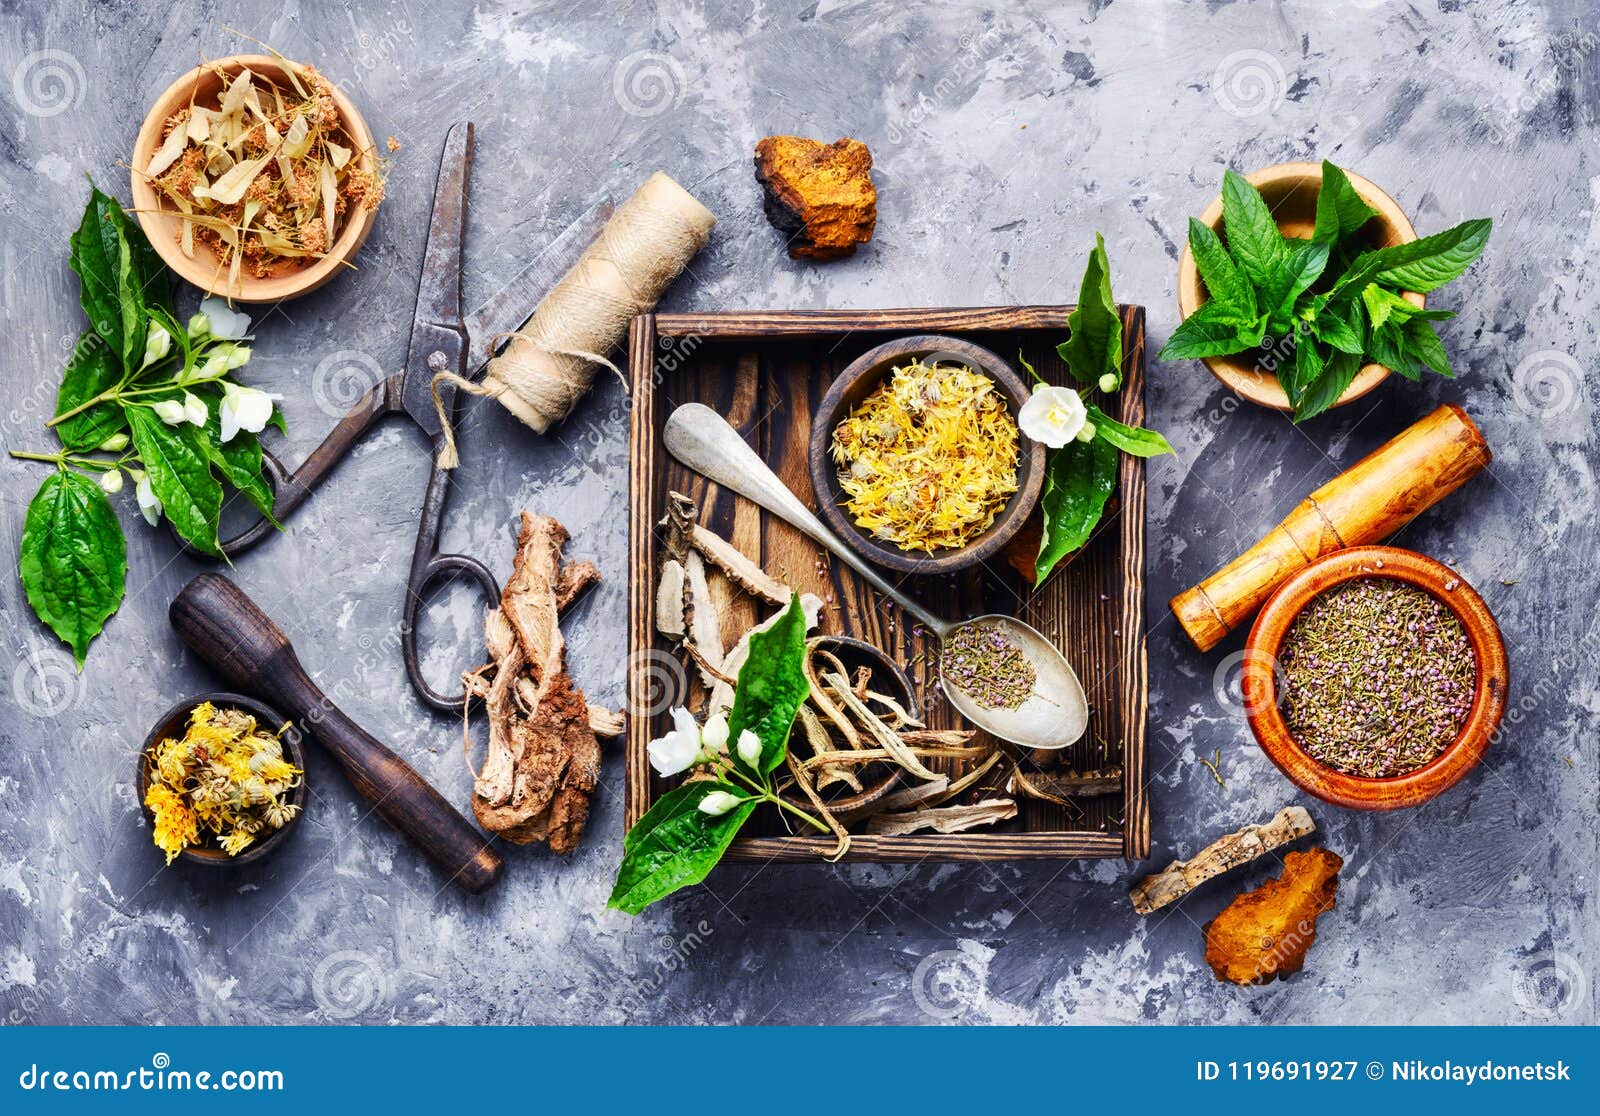 Natural Medicine, Herbs and Plant Stock Image - Image of nature, banner ...